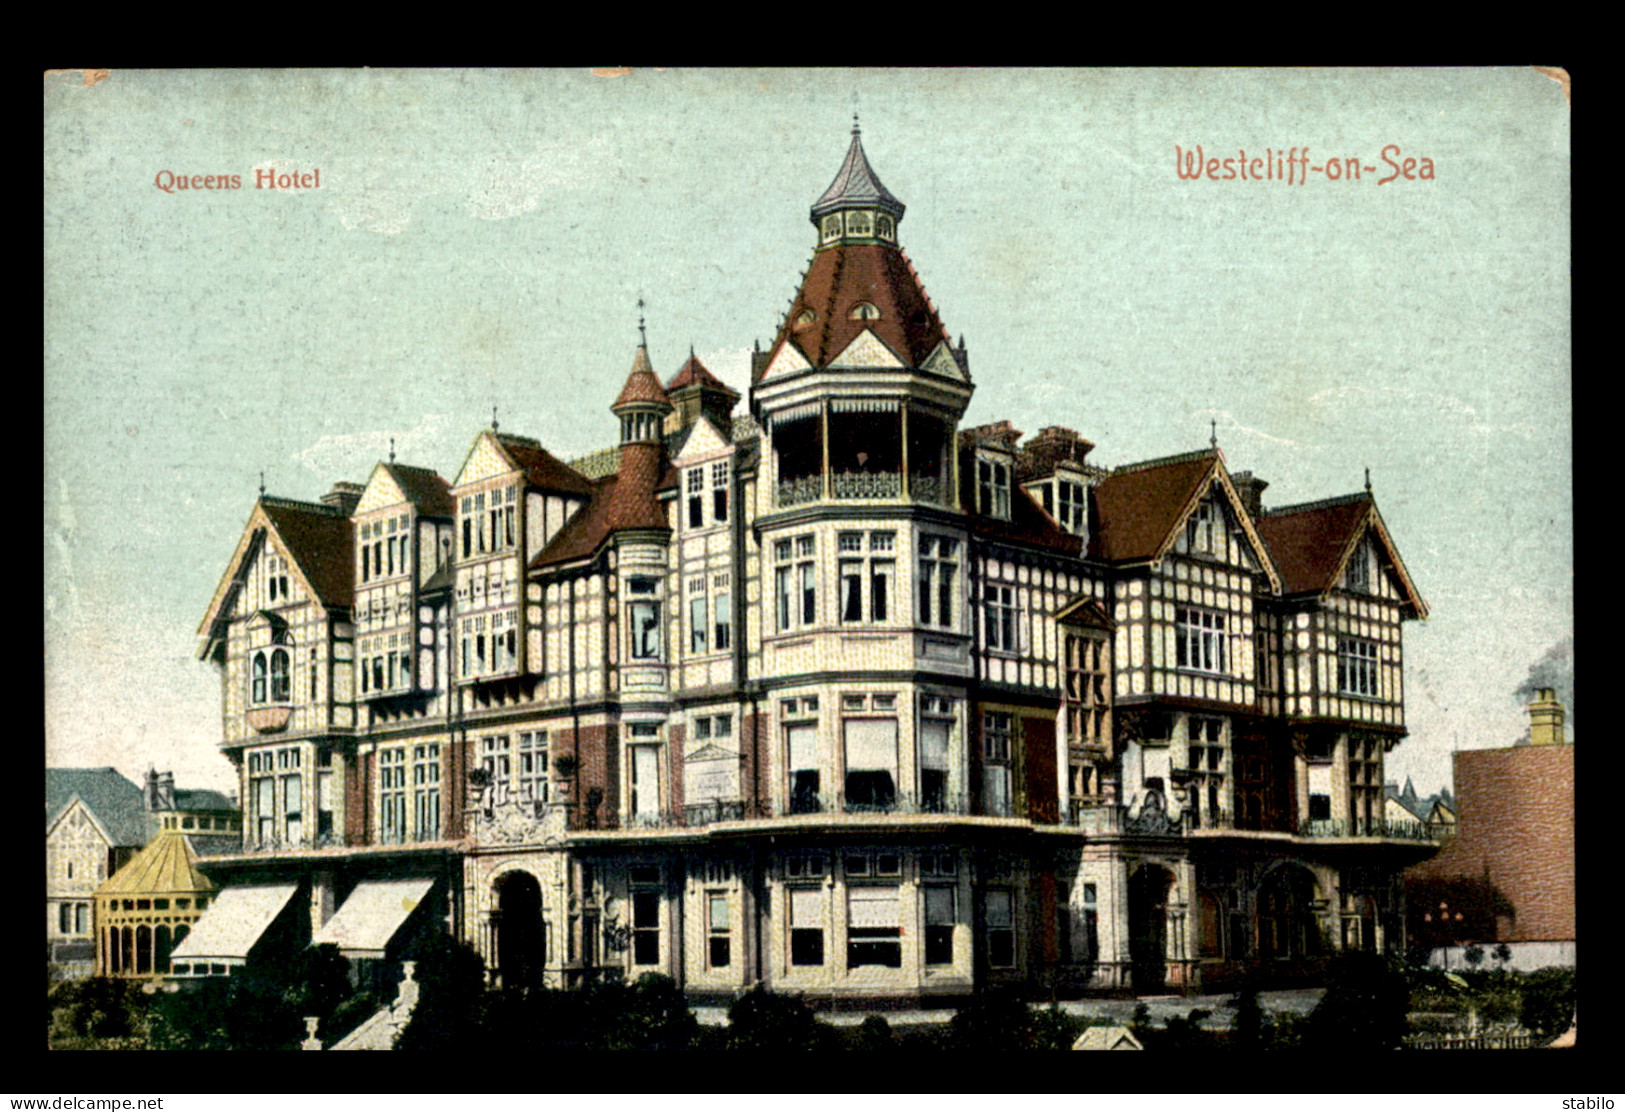 ROYAUME-UNI - ANGLETERRE - WESTCLIFF - QUEENS HOTEL - Southend, Westcliff & Leigh